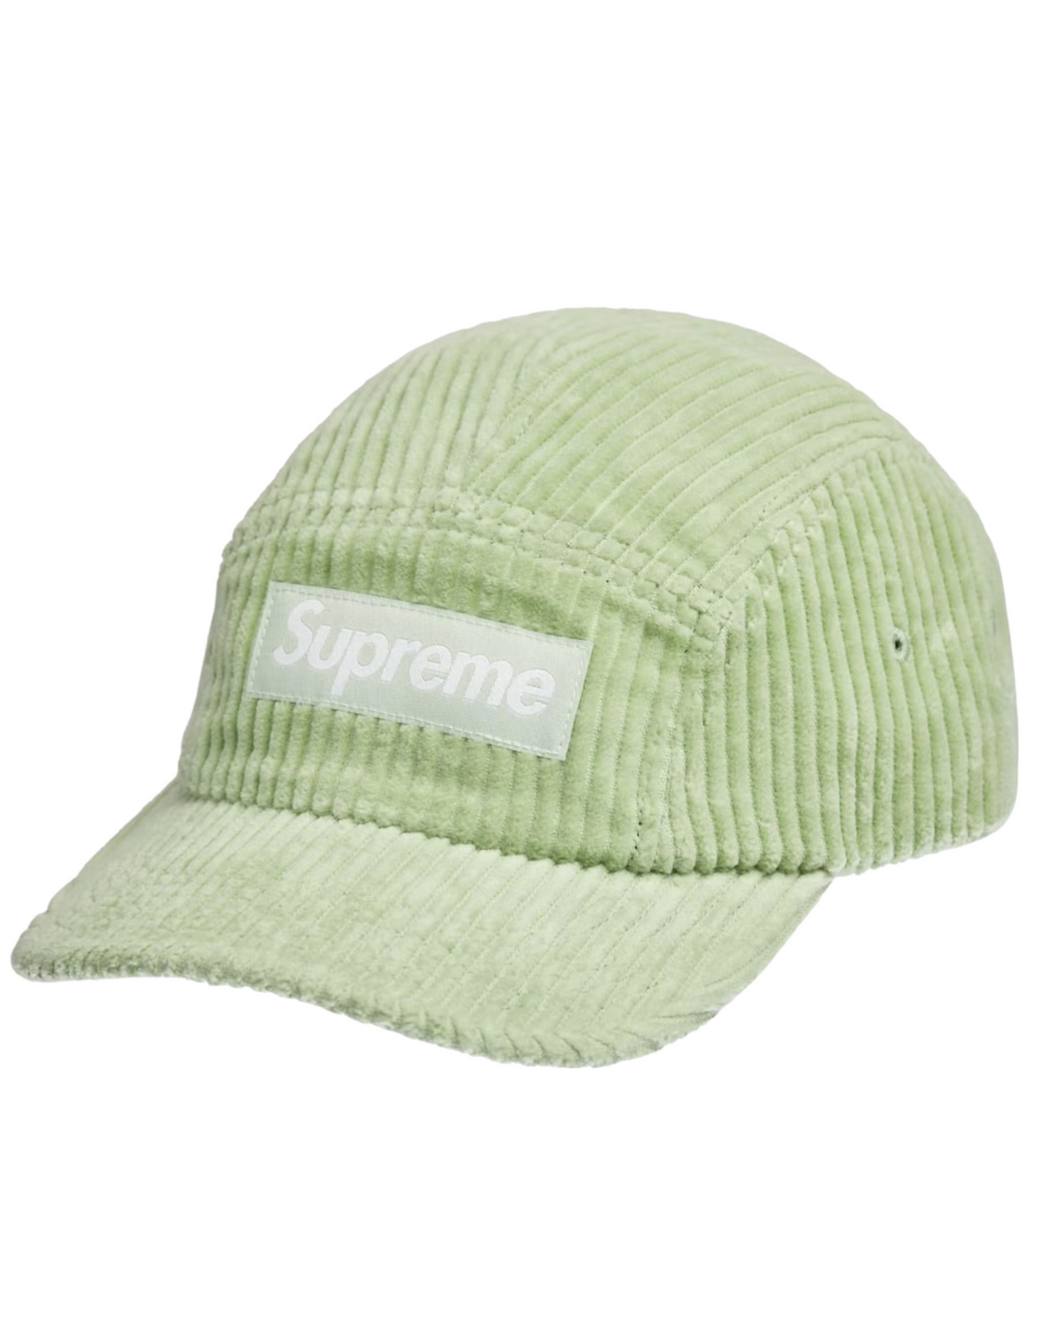 Supreme SS22 Corduroy Camp 5 Panel Cap in Green ⏐ One Size